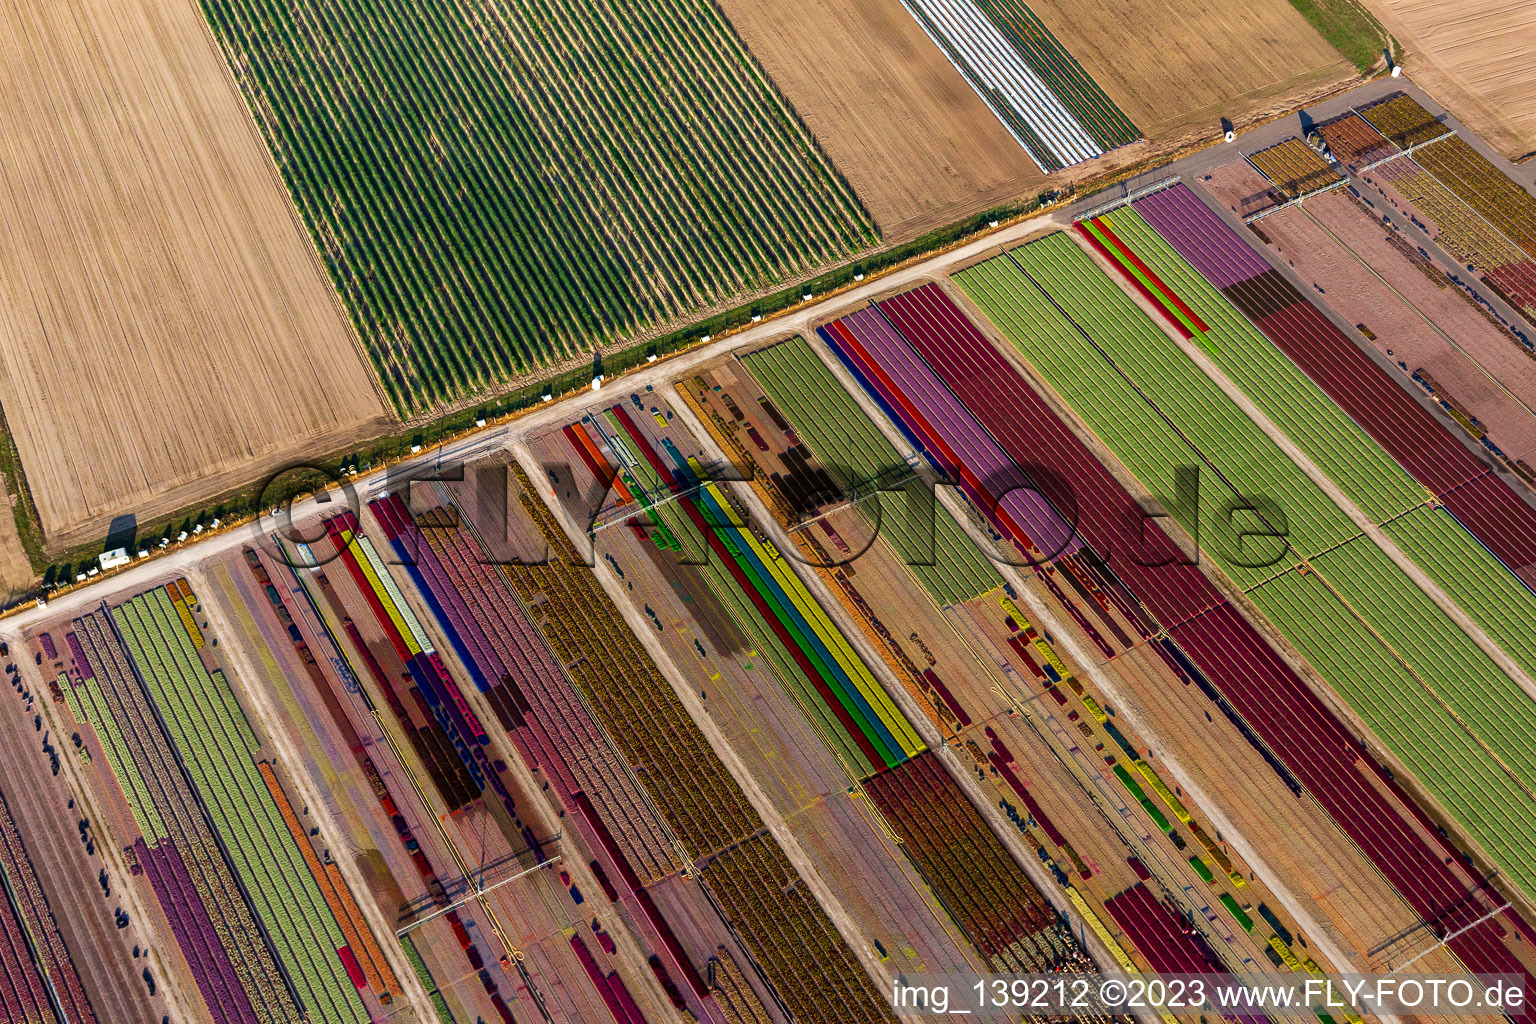 Colorful flower beds from Ferme Brandt Arbogast Morsbronn in Durrenbach in the state Bas-Rhin, France from the plane